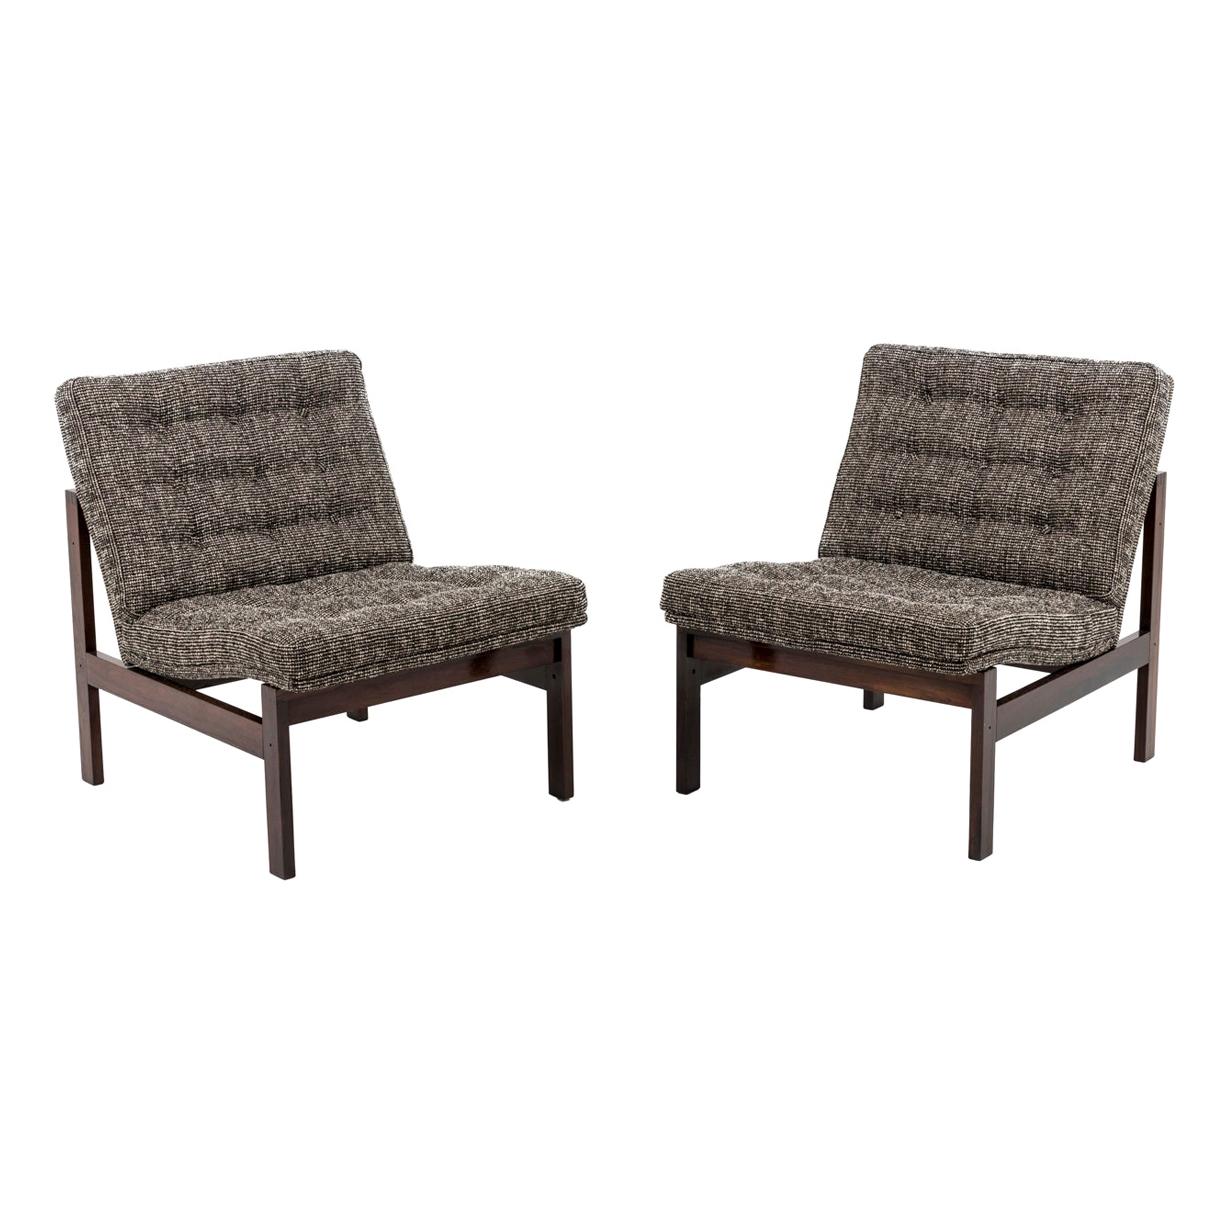 France & Søn, Pair of Danish Fireside Chairs in Rosewood, 1962